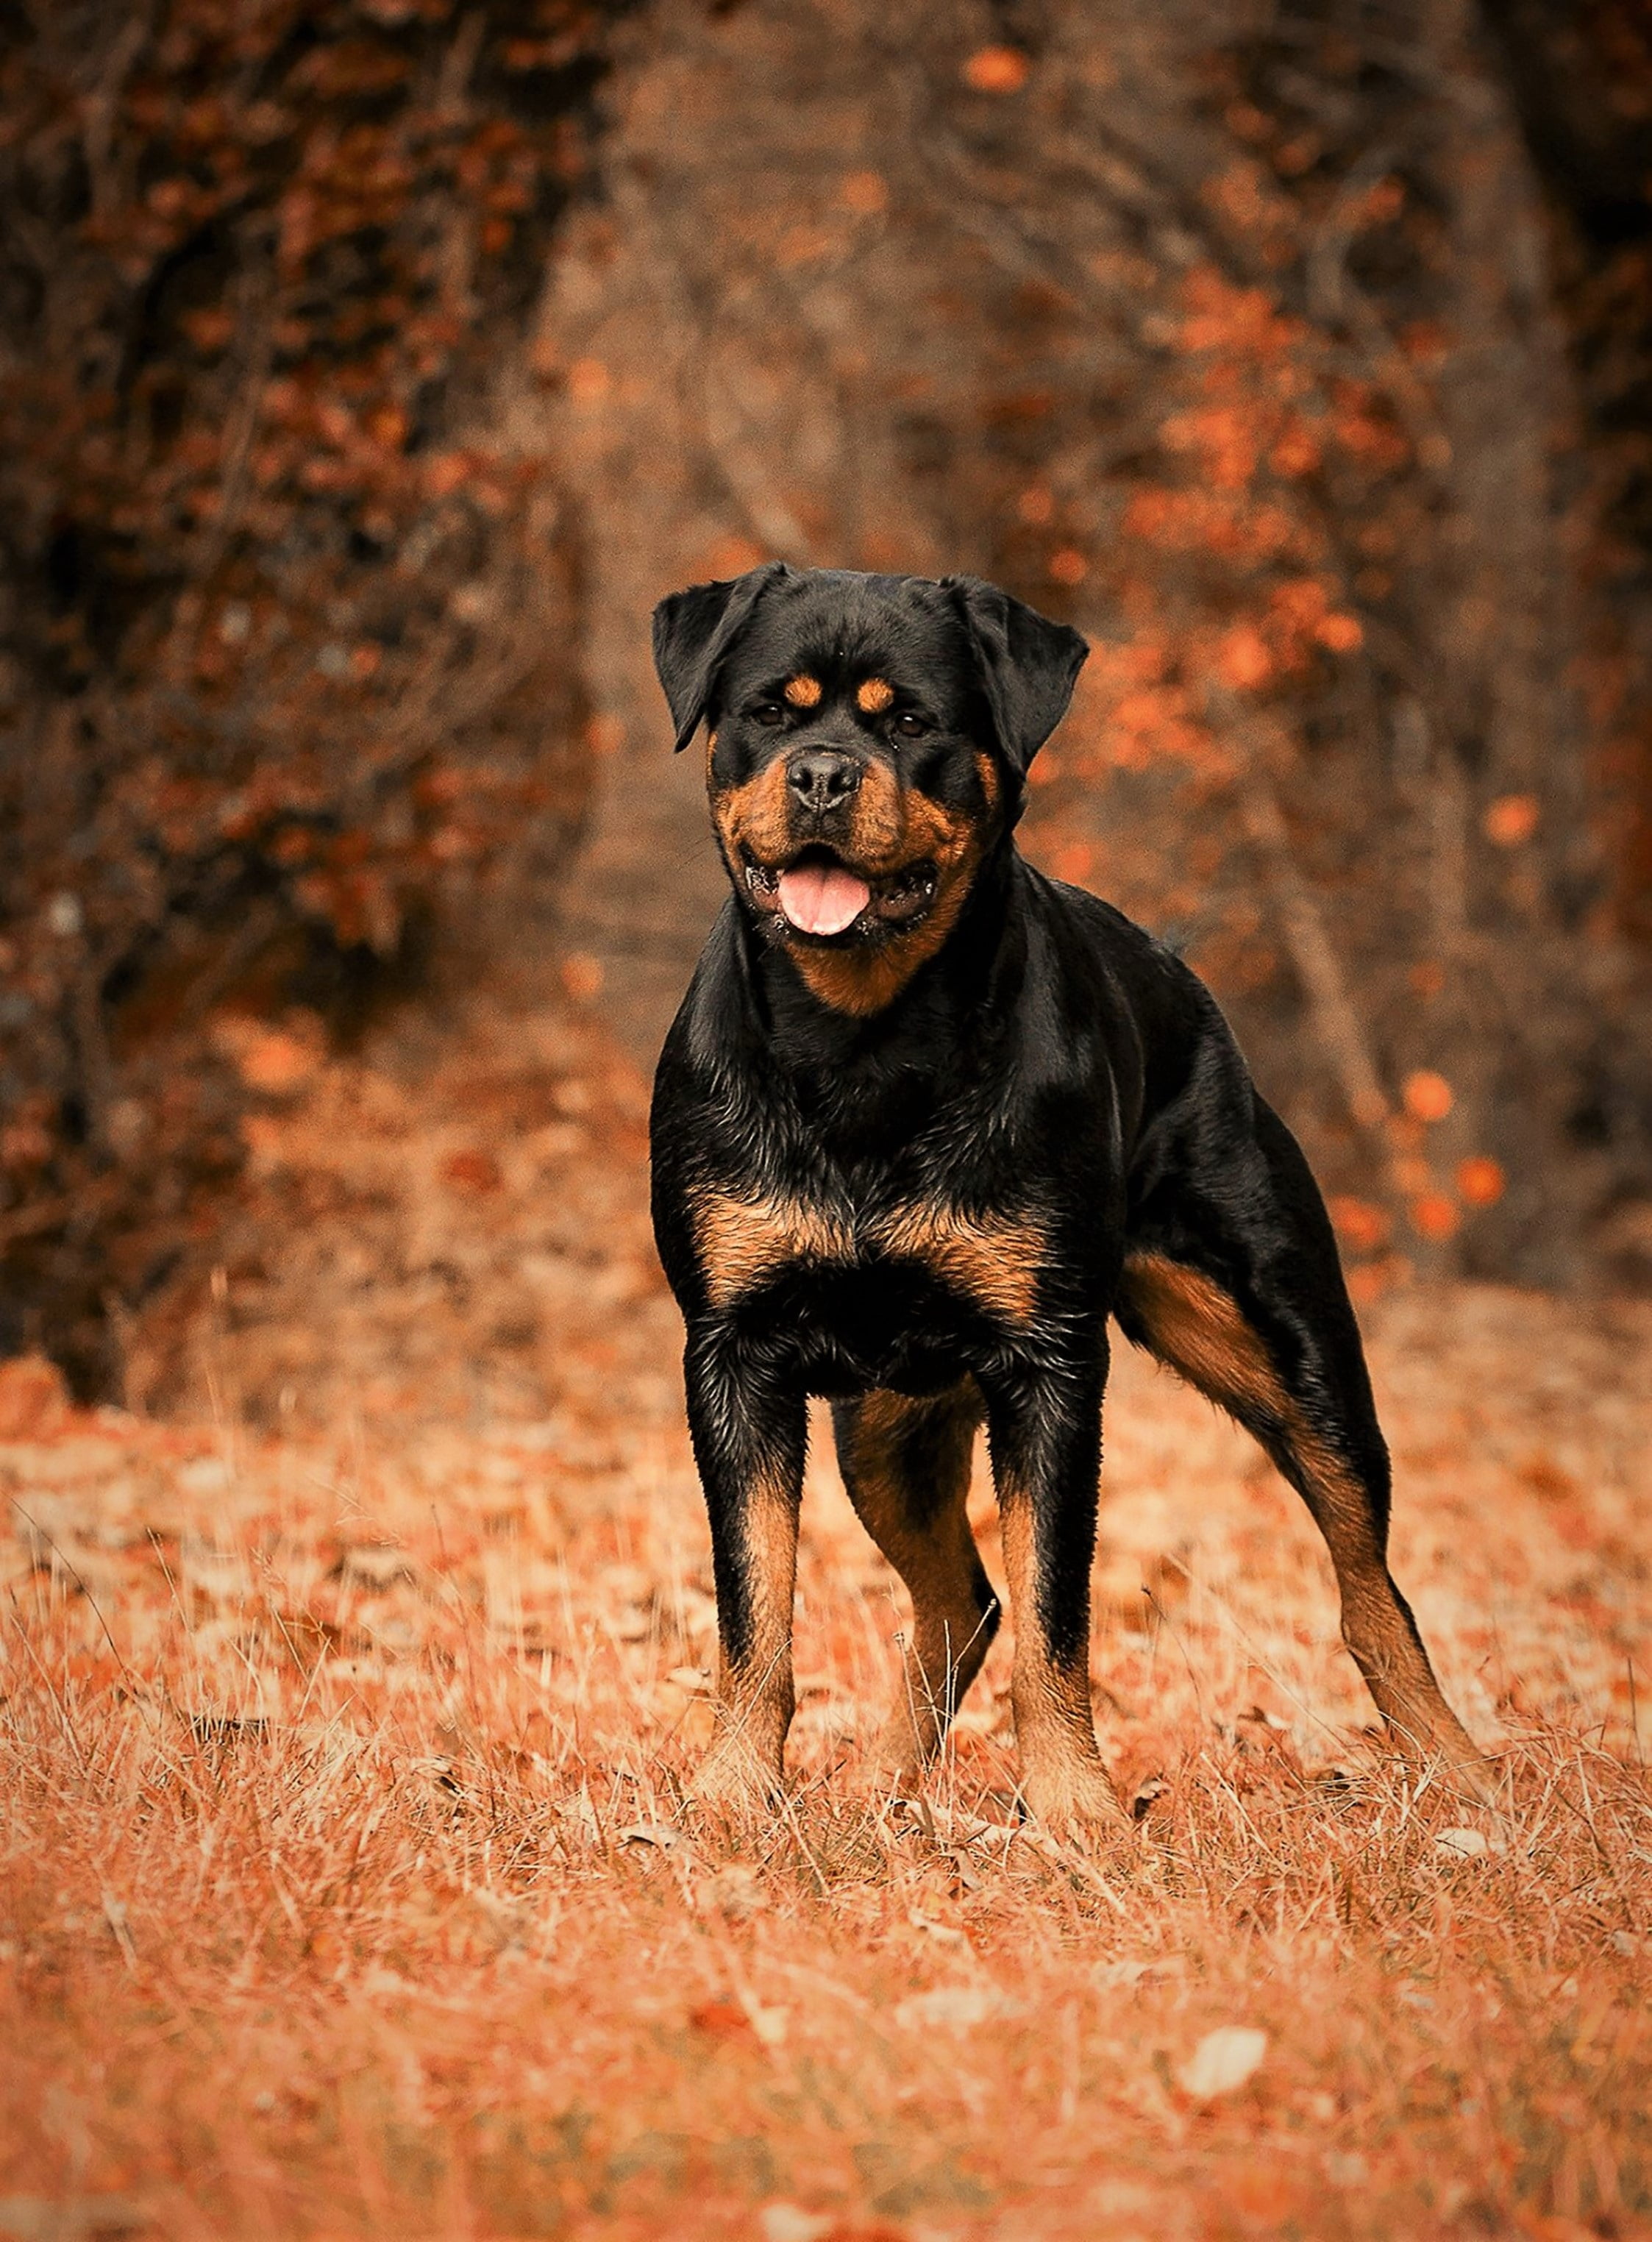 short-coated black and brown dog, rottweiler, autumn, walk, one animal